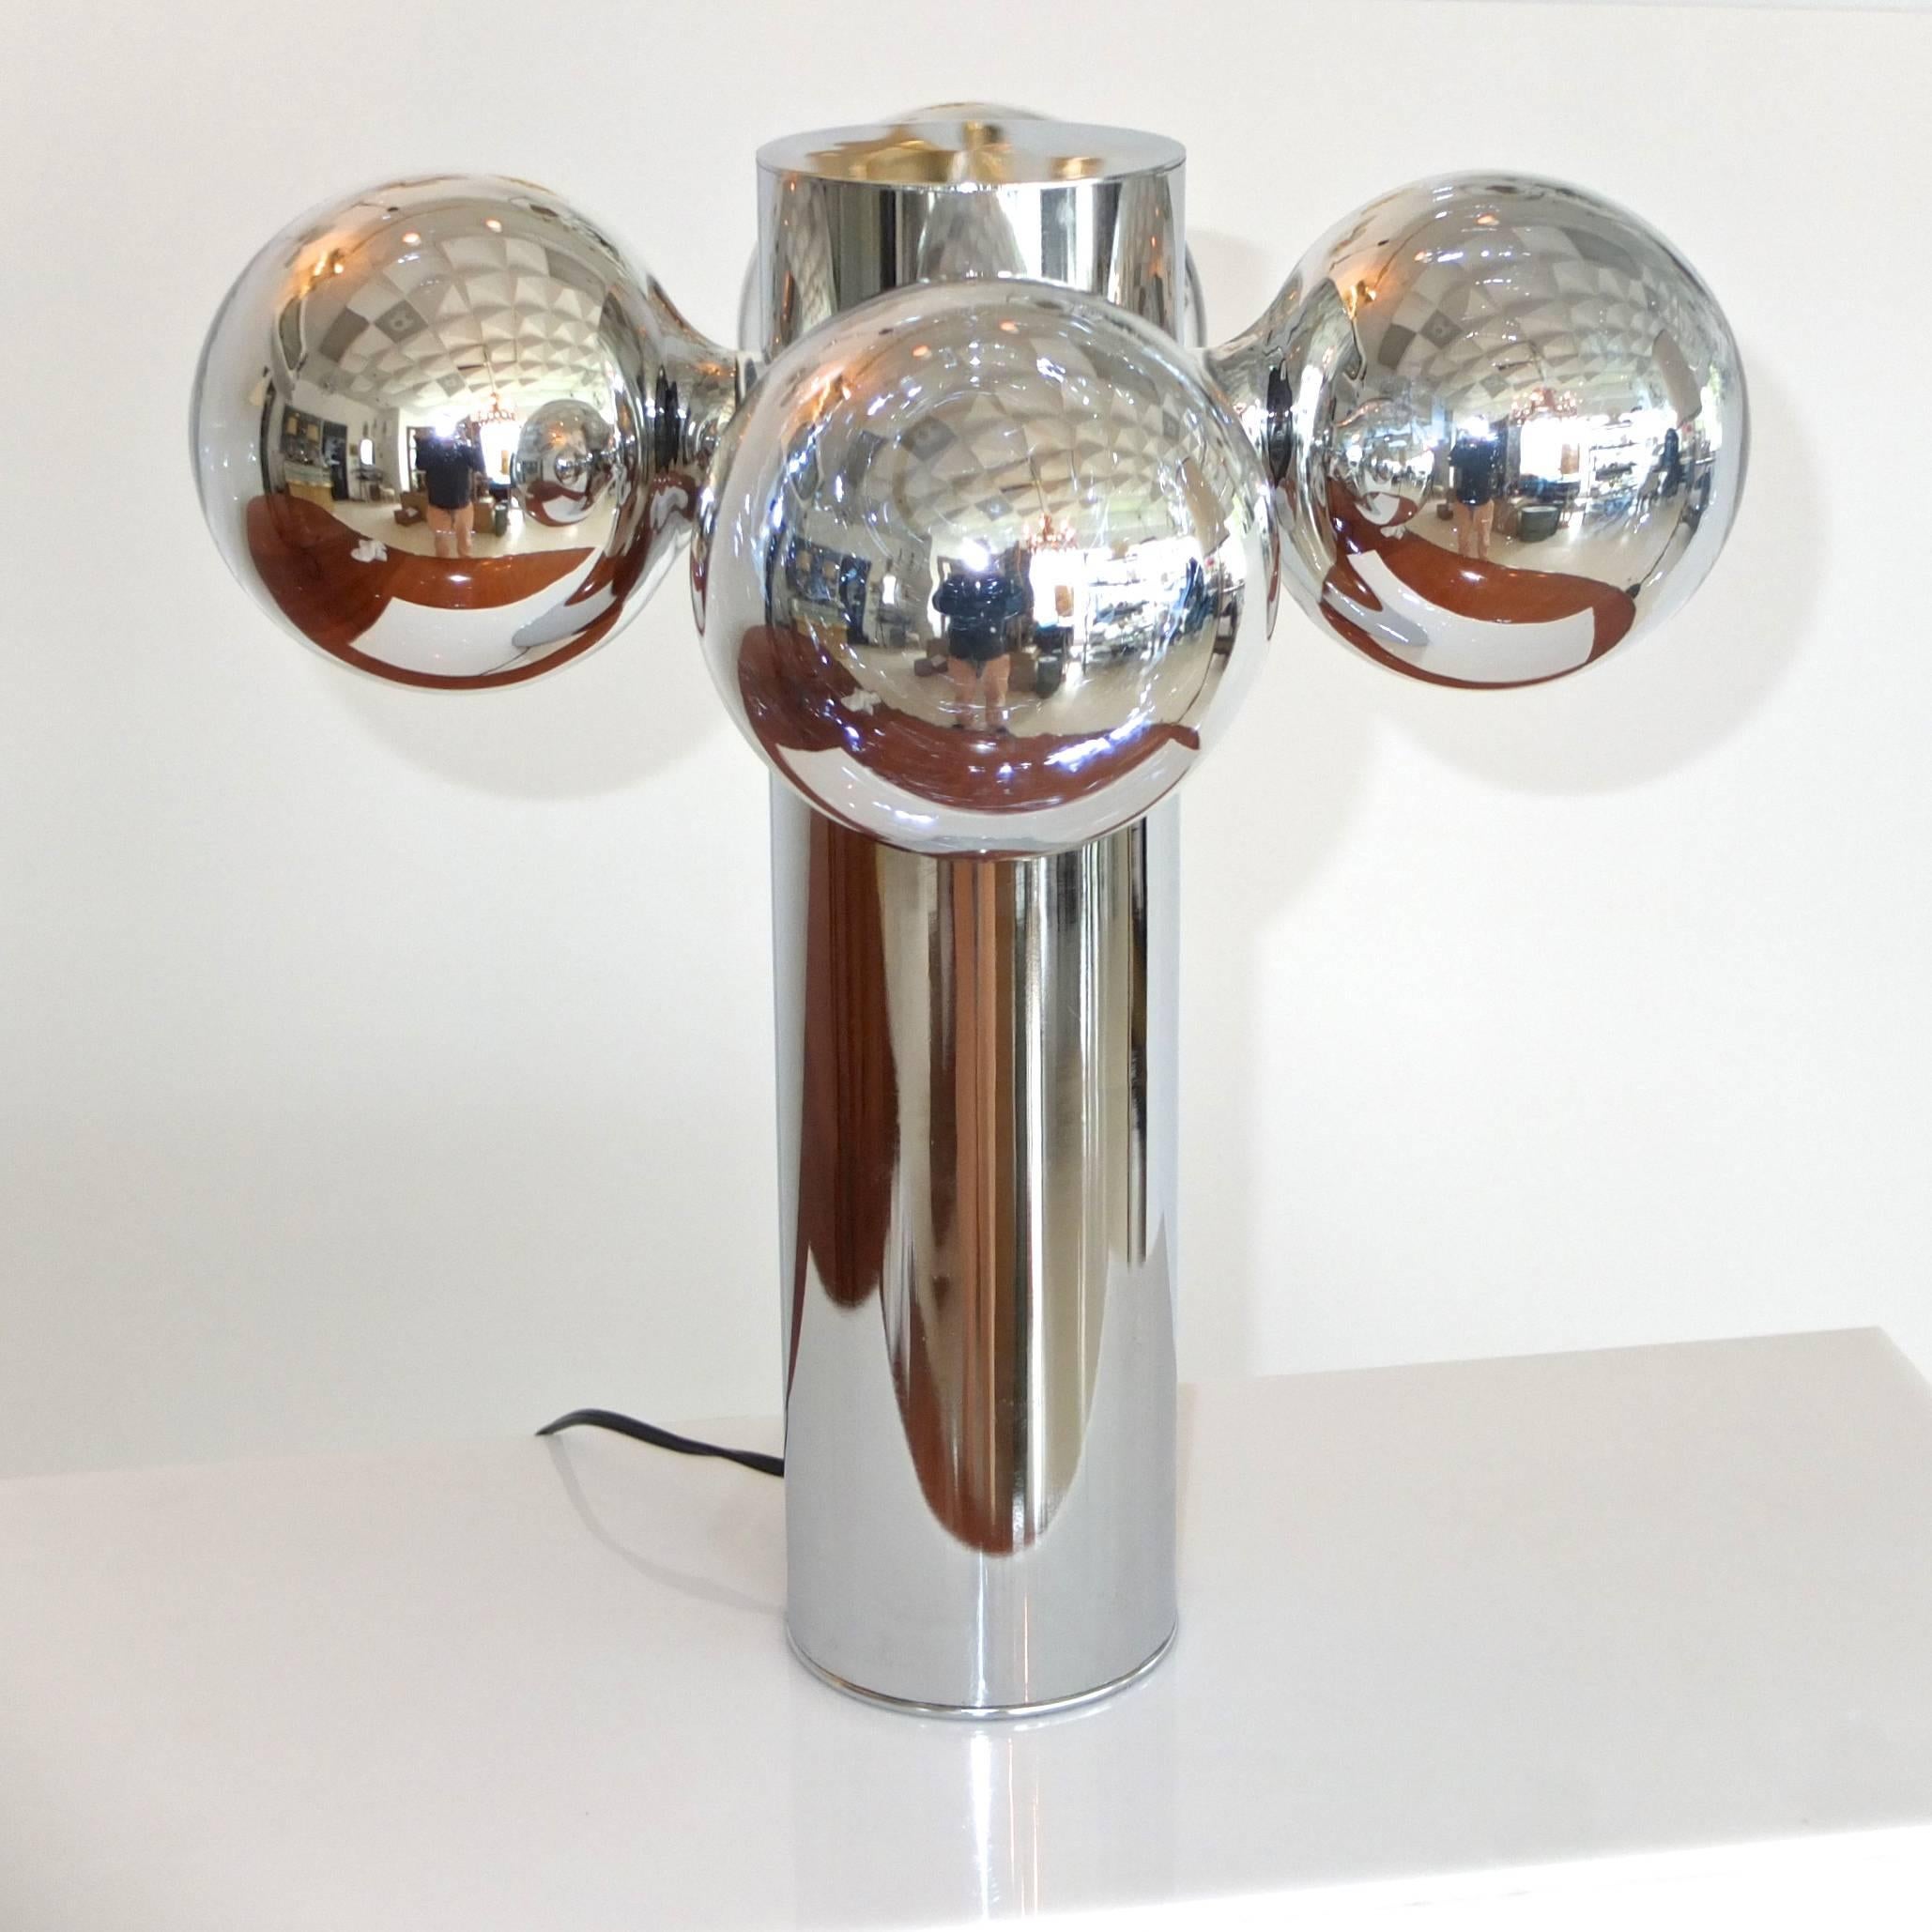 Extraordinary space age table lamp from the late 1960s early 1970s. Chrome plated steel cylinder 4 inches diameter with four standard Edison screw cap sockets below the top. Includes the four original custom 5 inch diameter glass globe bulbs which